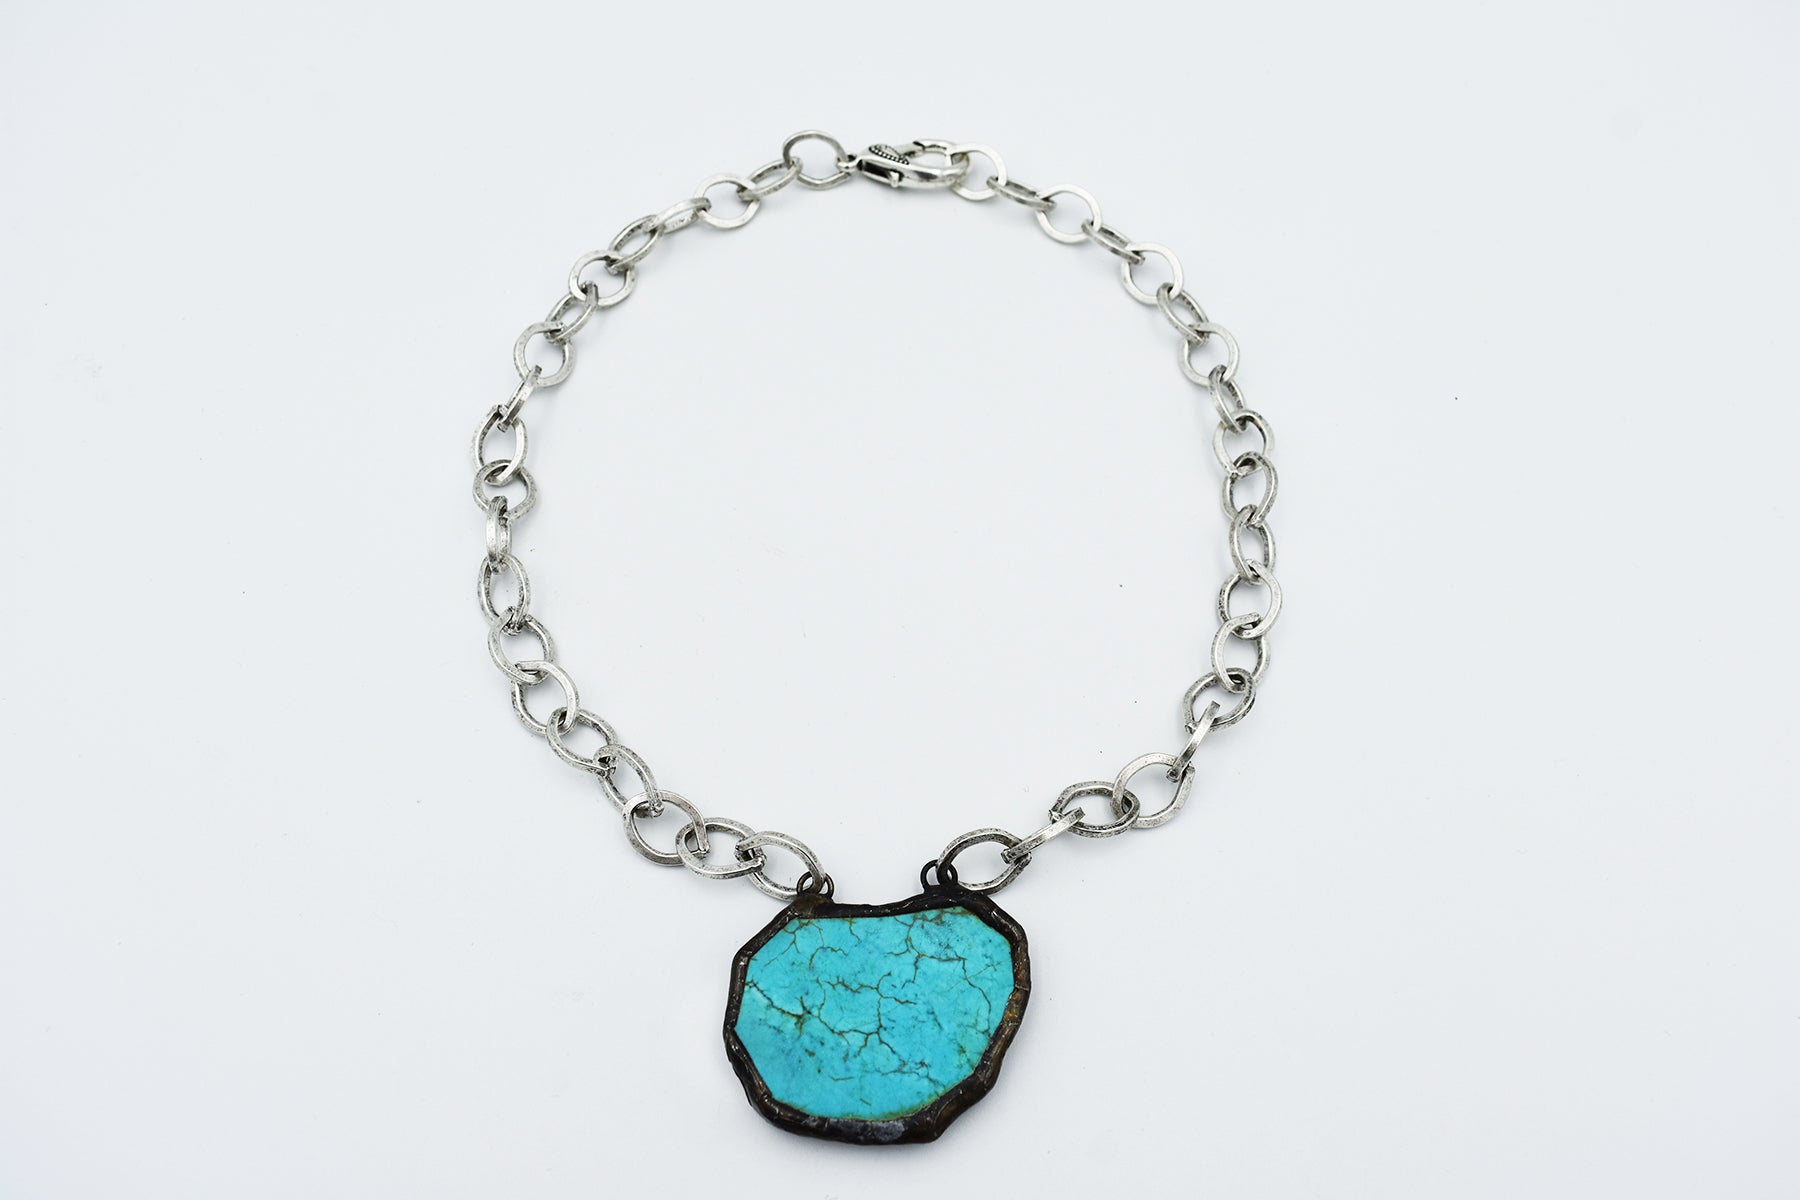 Turquoise Center Focal Necklace